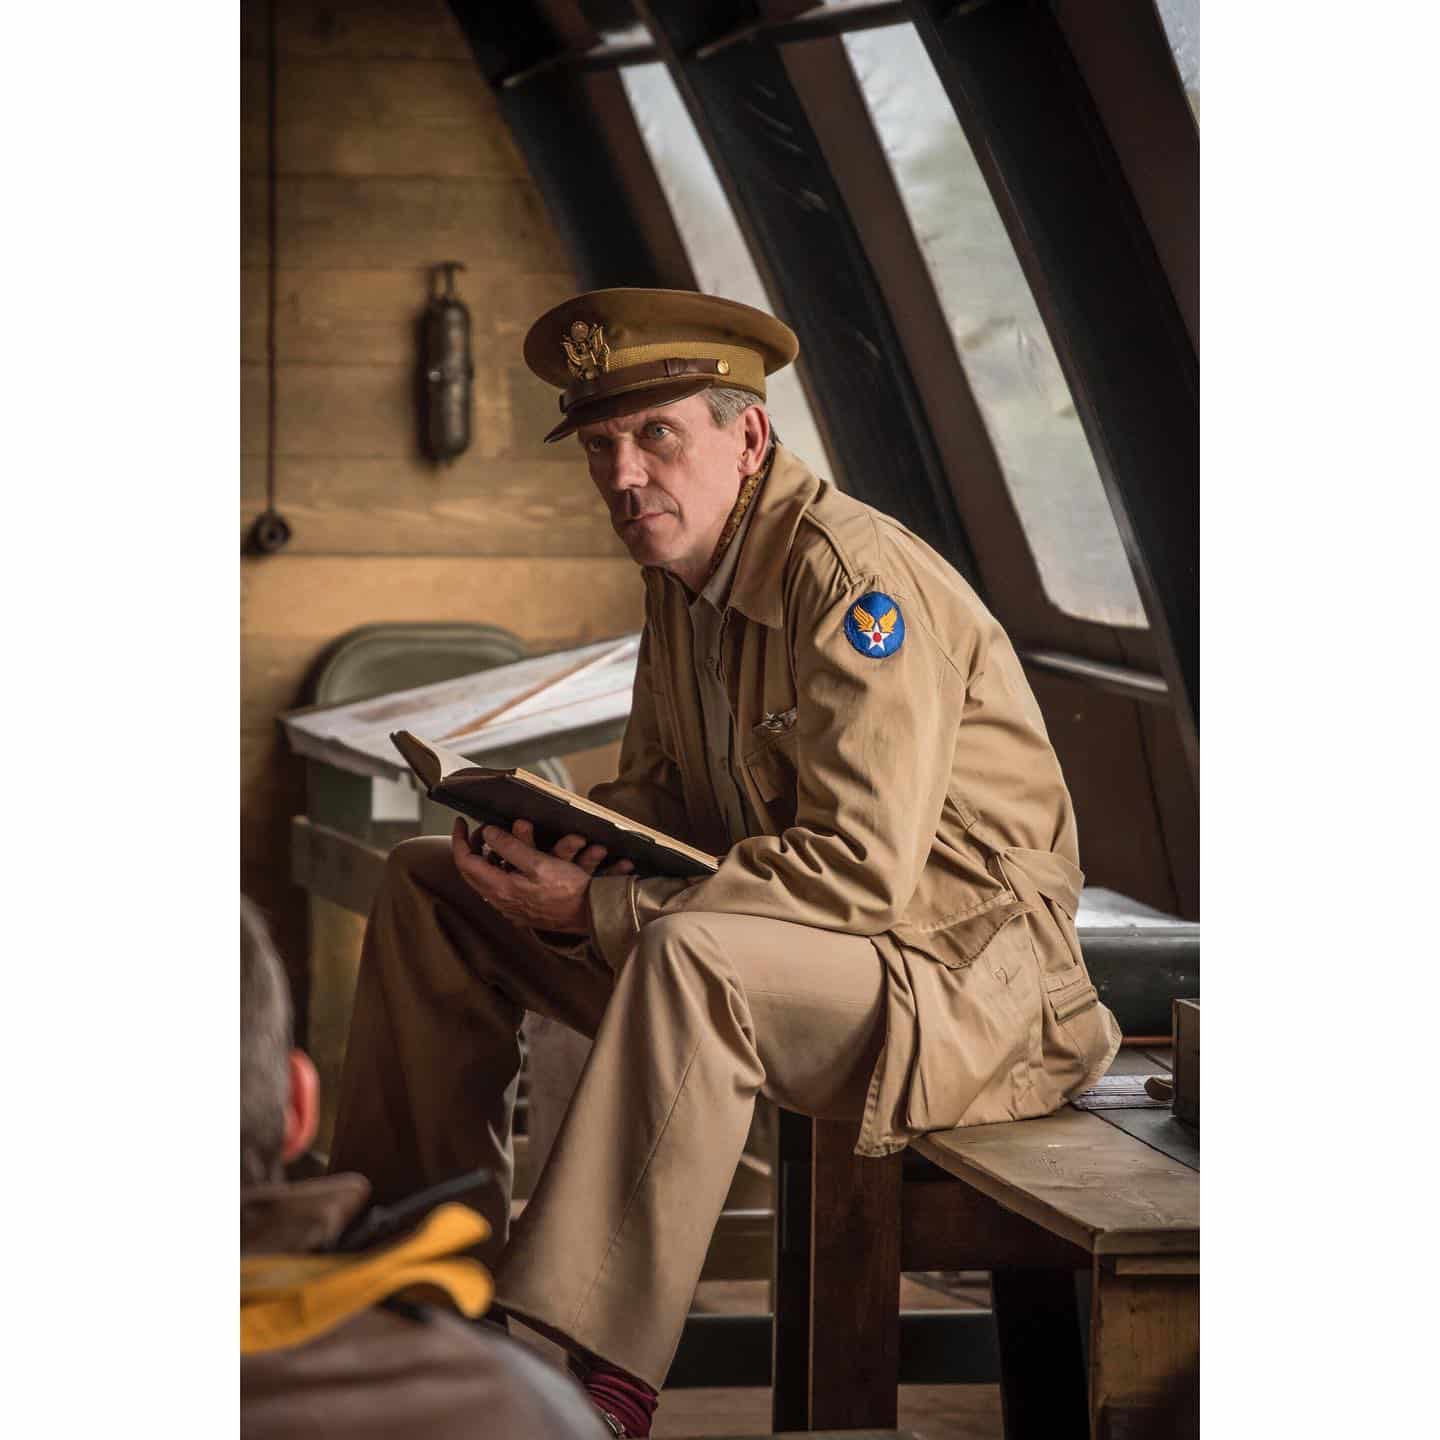 🛩 A sneak peak of Hugh Laurie in Catch-22, airing tonight at 9pm on @channel4 🛩
.
.
.